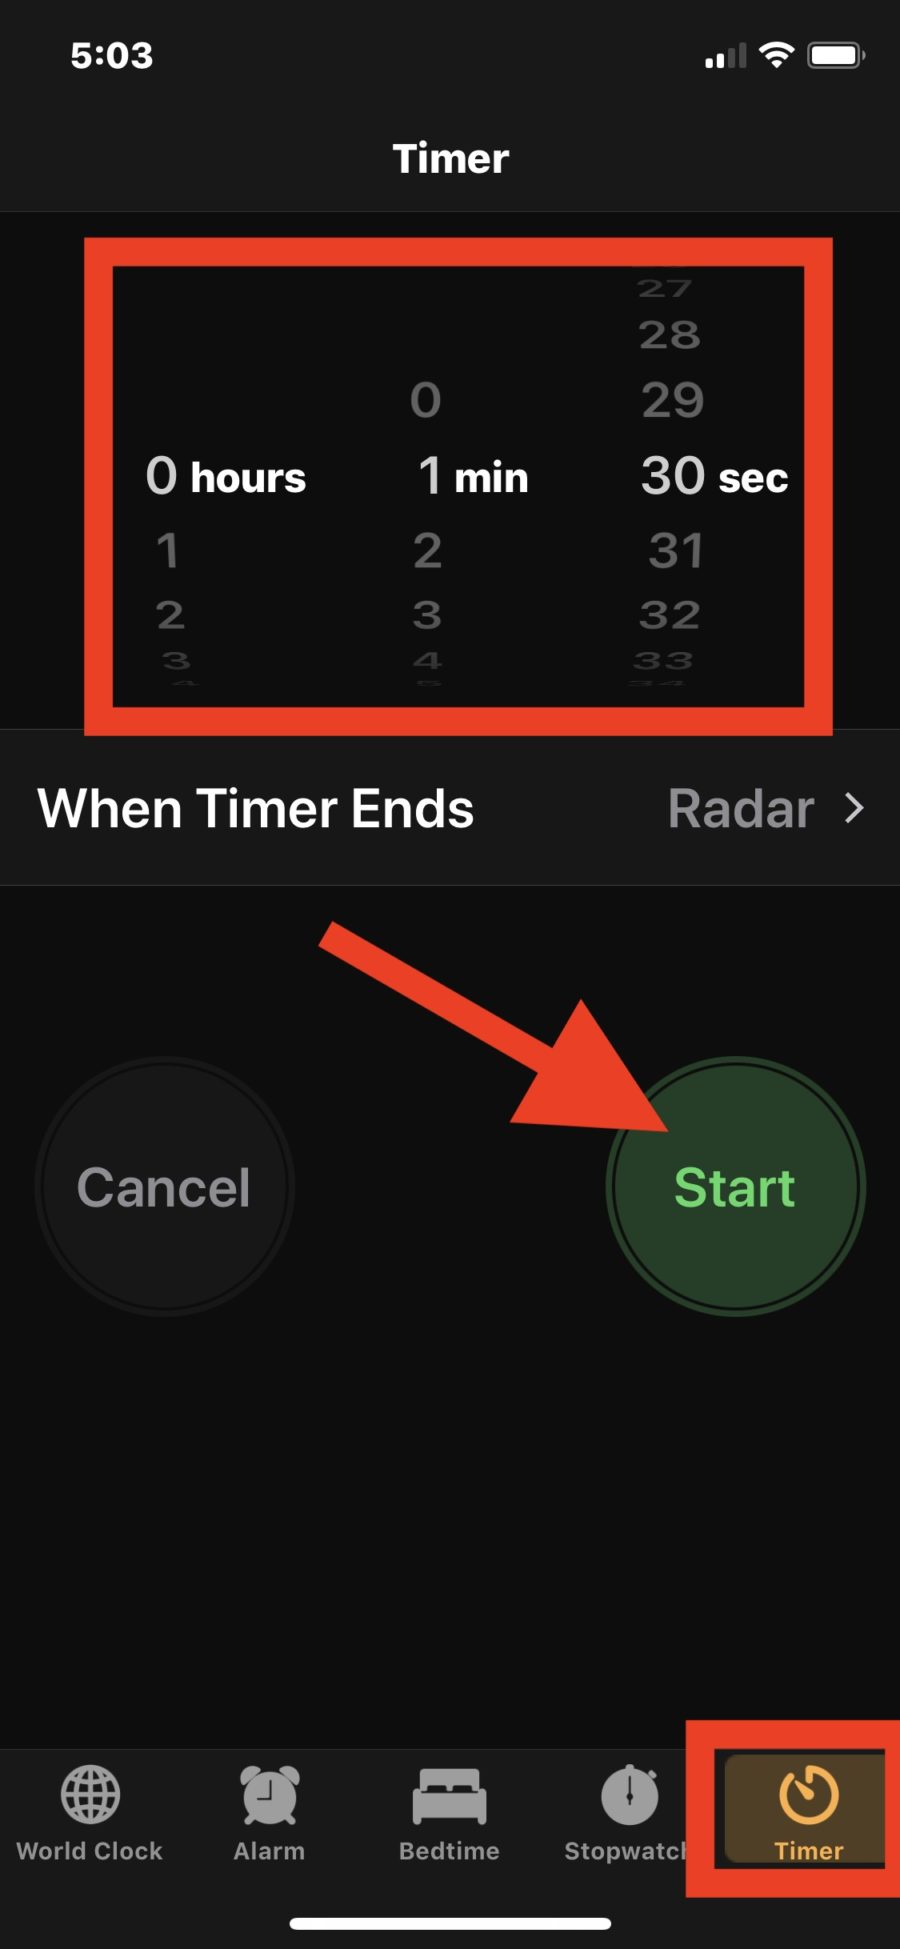 set a timer for 1 minute